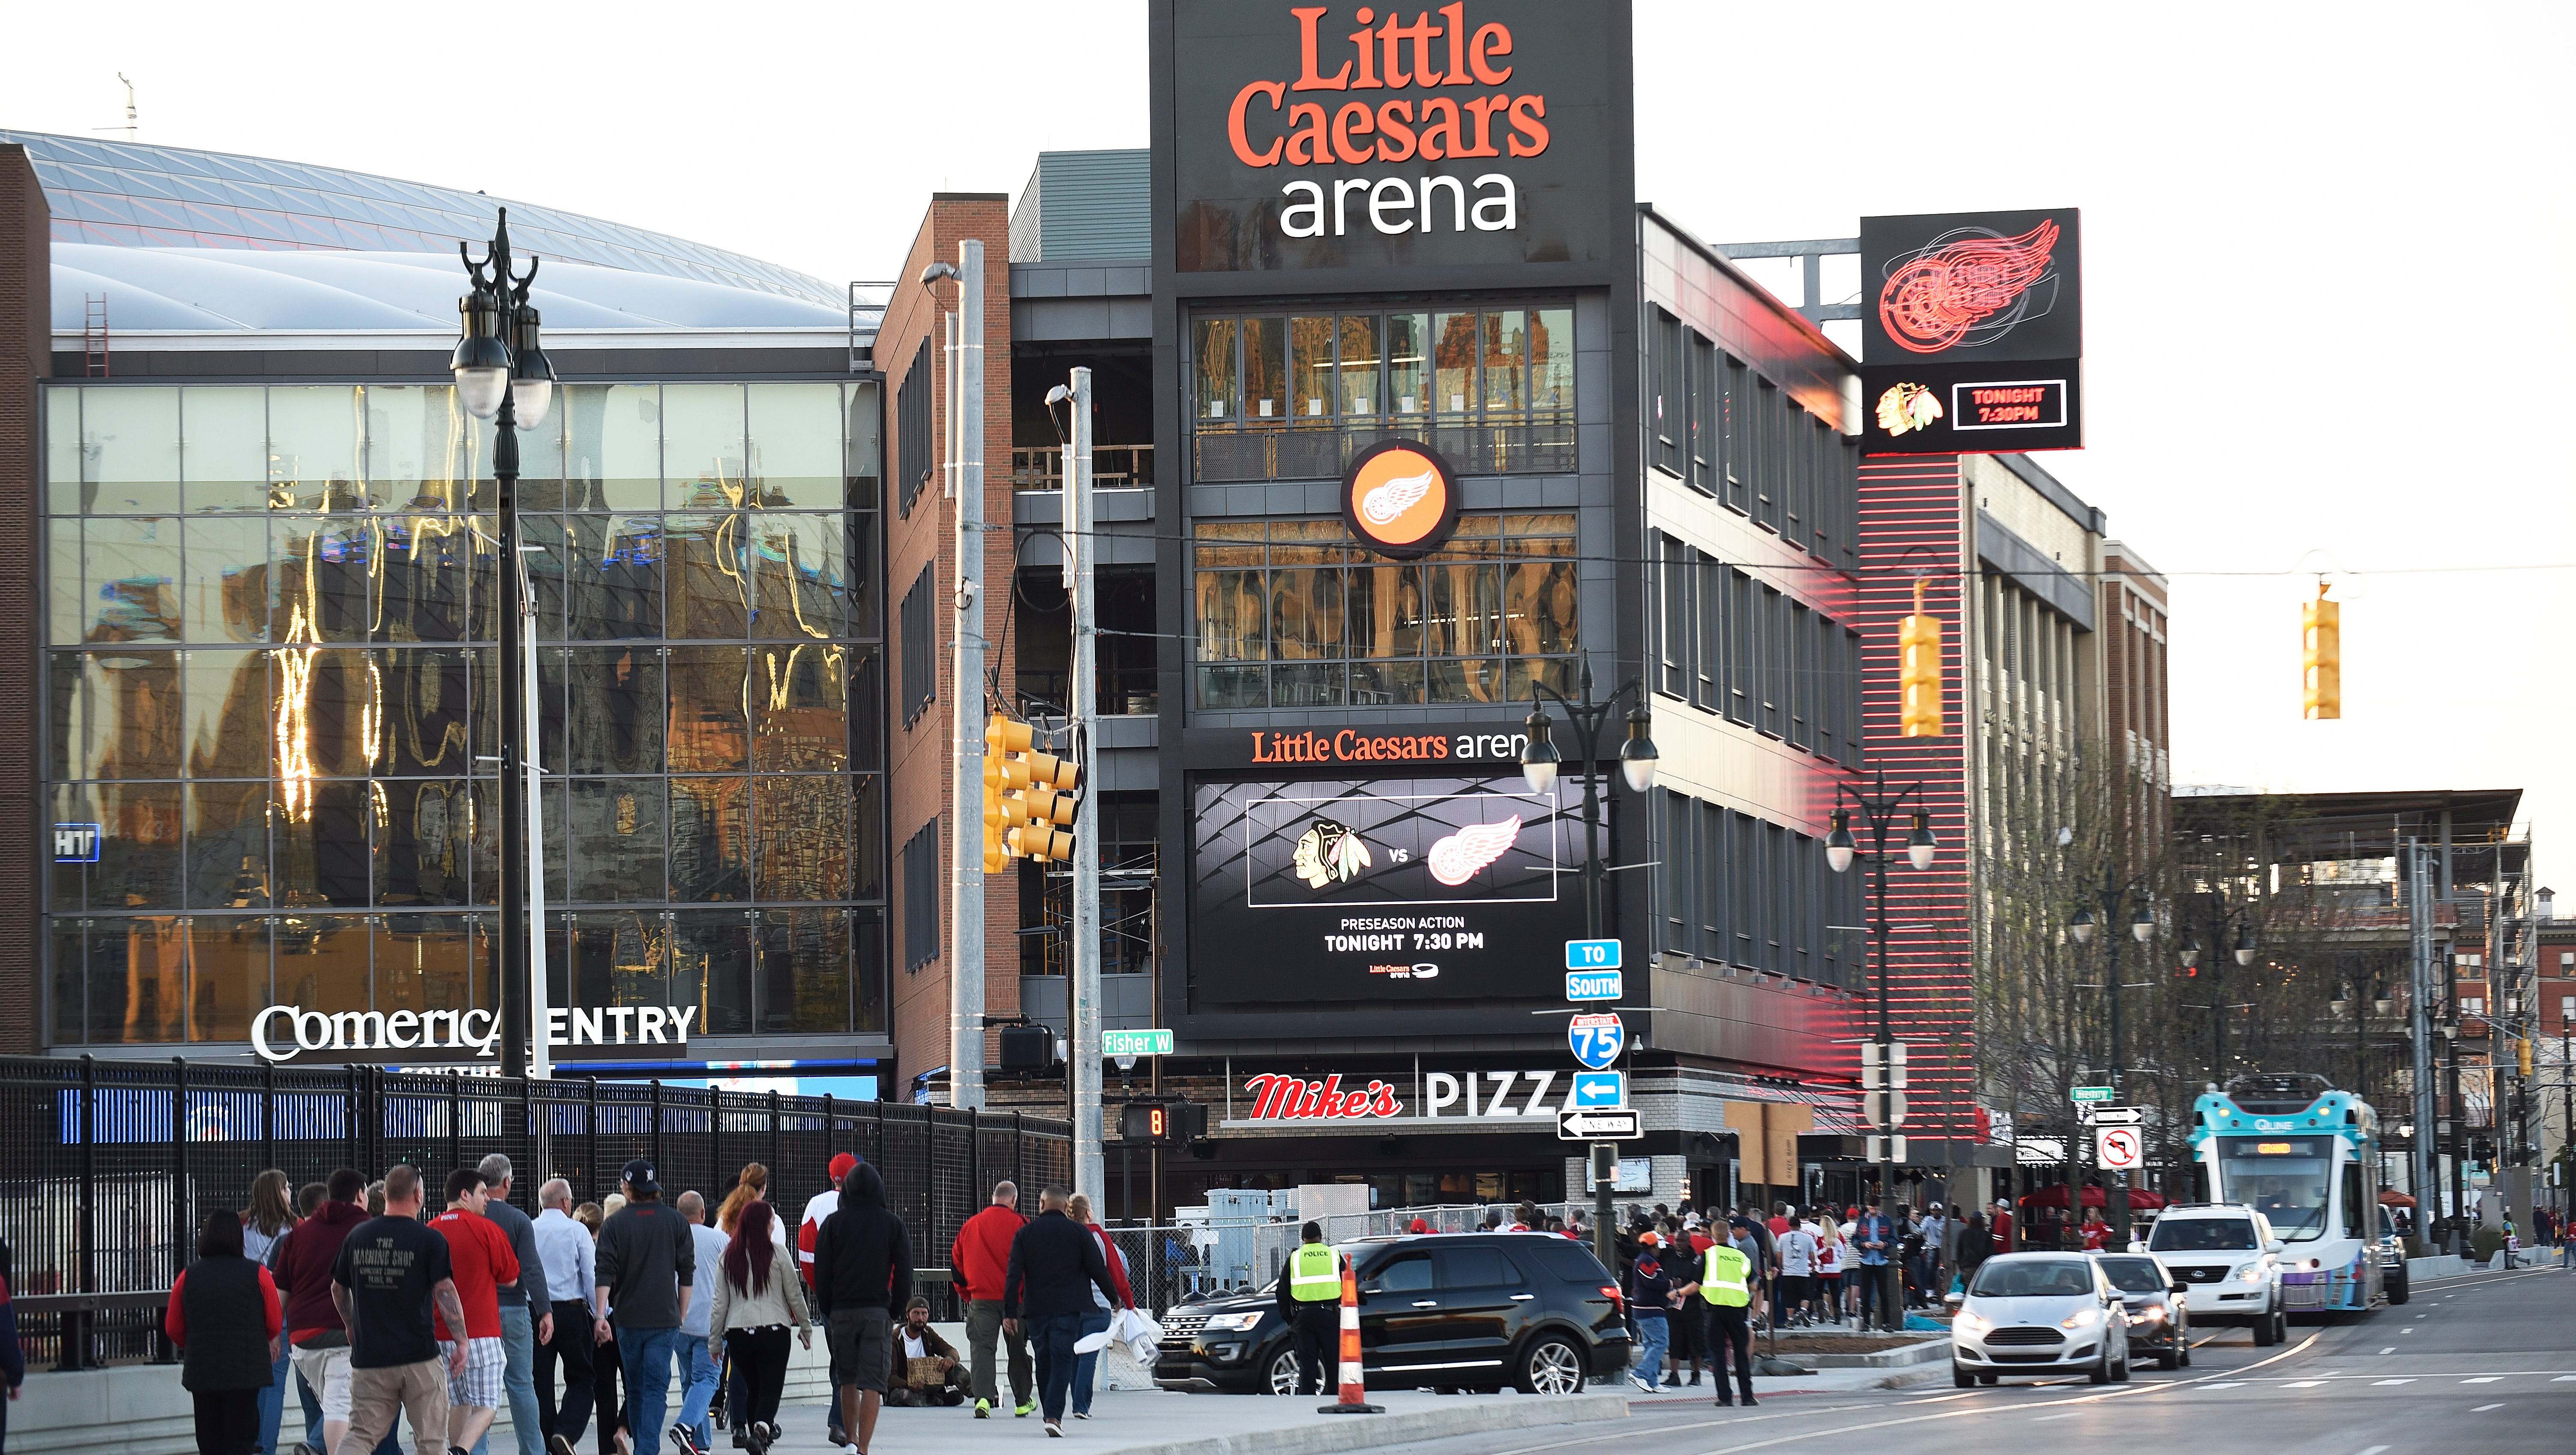 Traffic around Little Caesars arena includes foot, car and Qline.